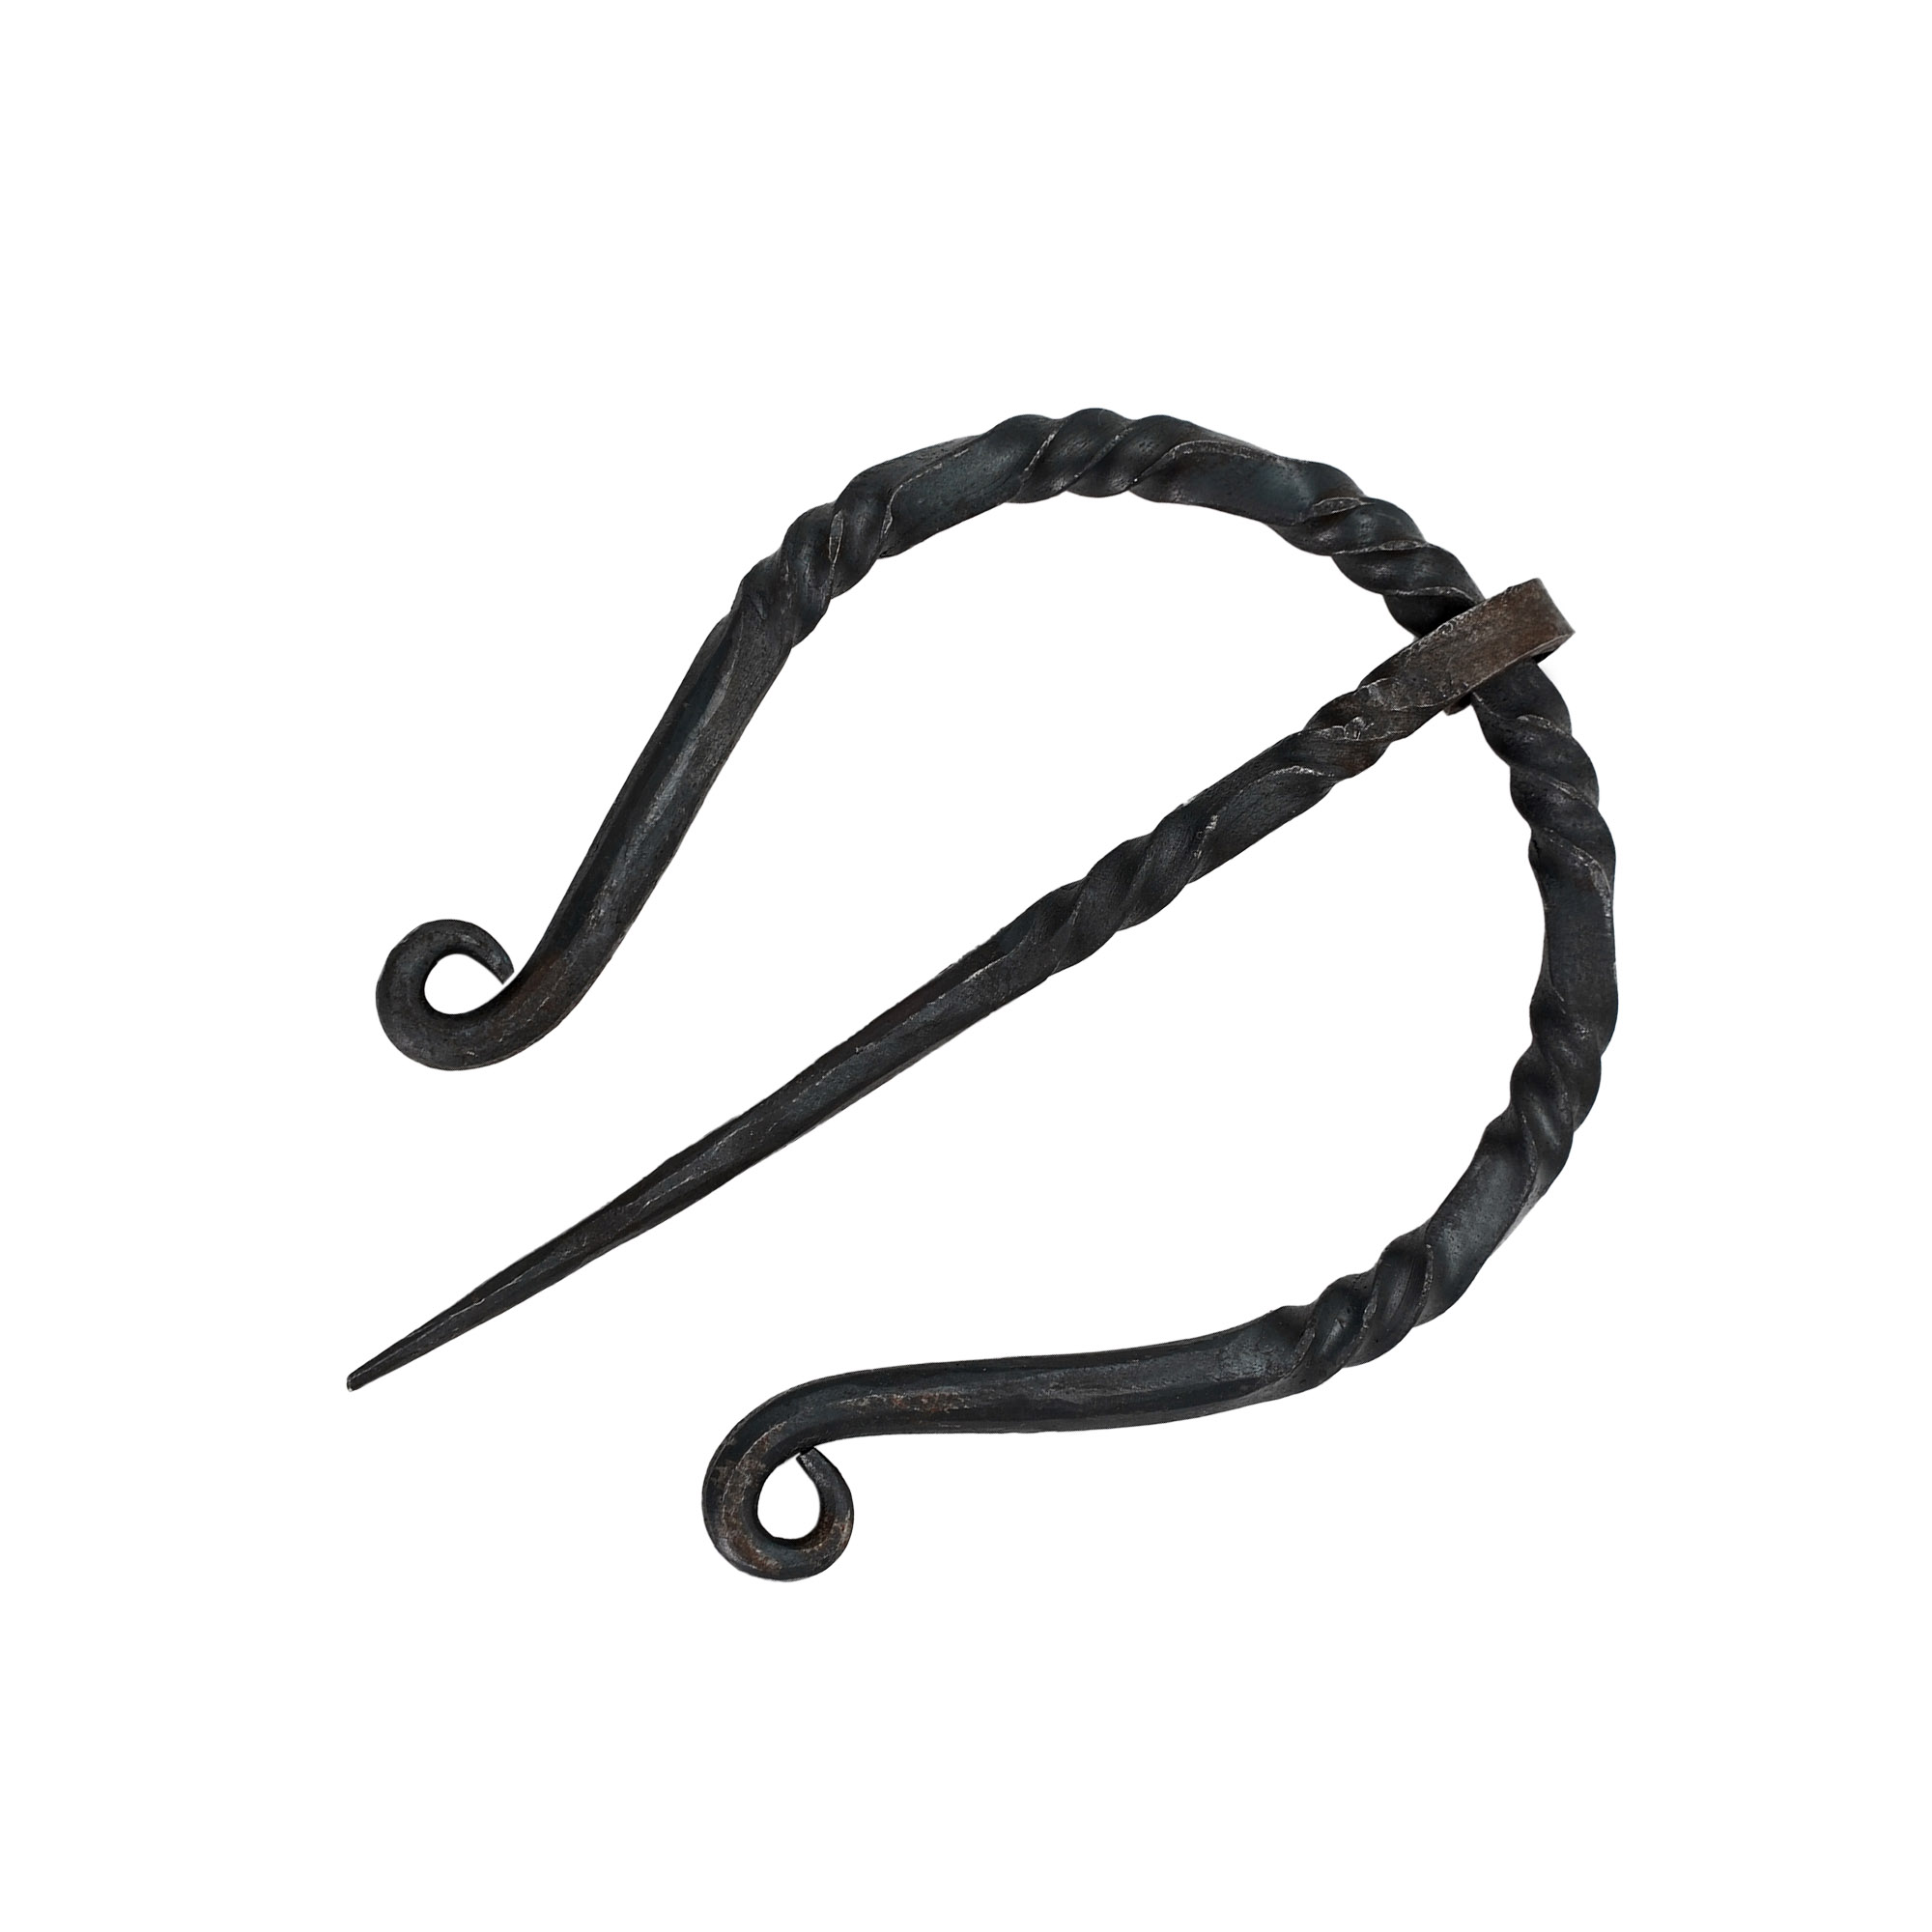 Hand Forged Fibula Sturdy Cloak Brooch for a Touch of Elegance